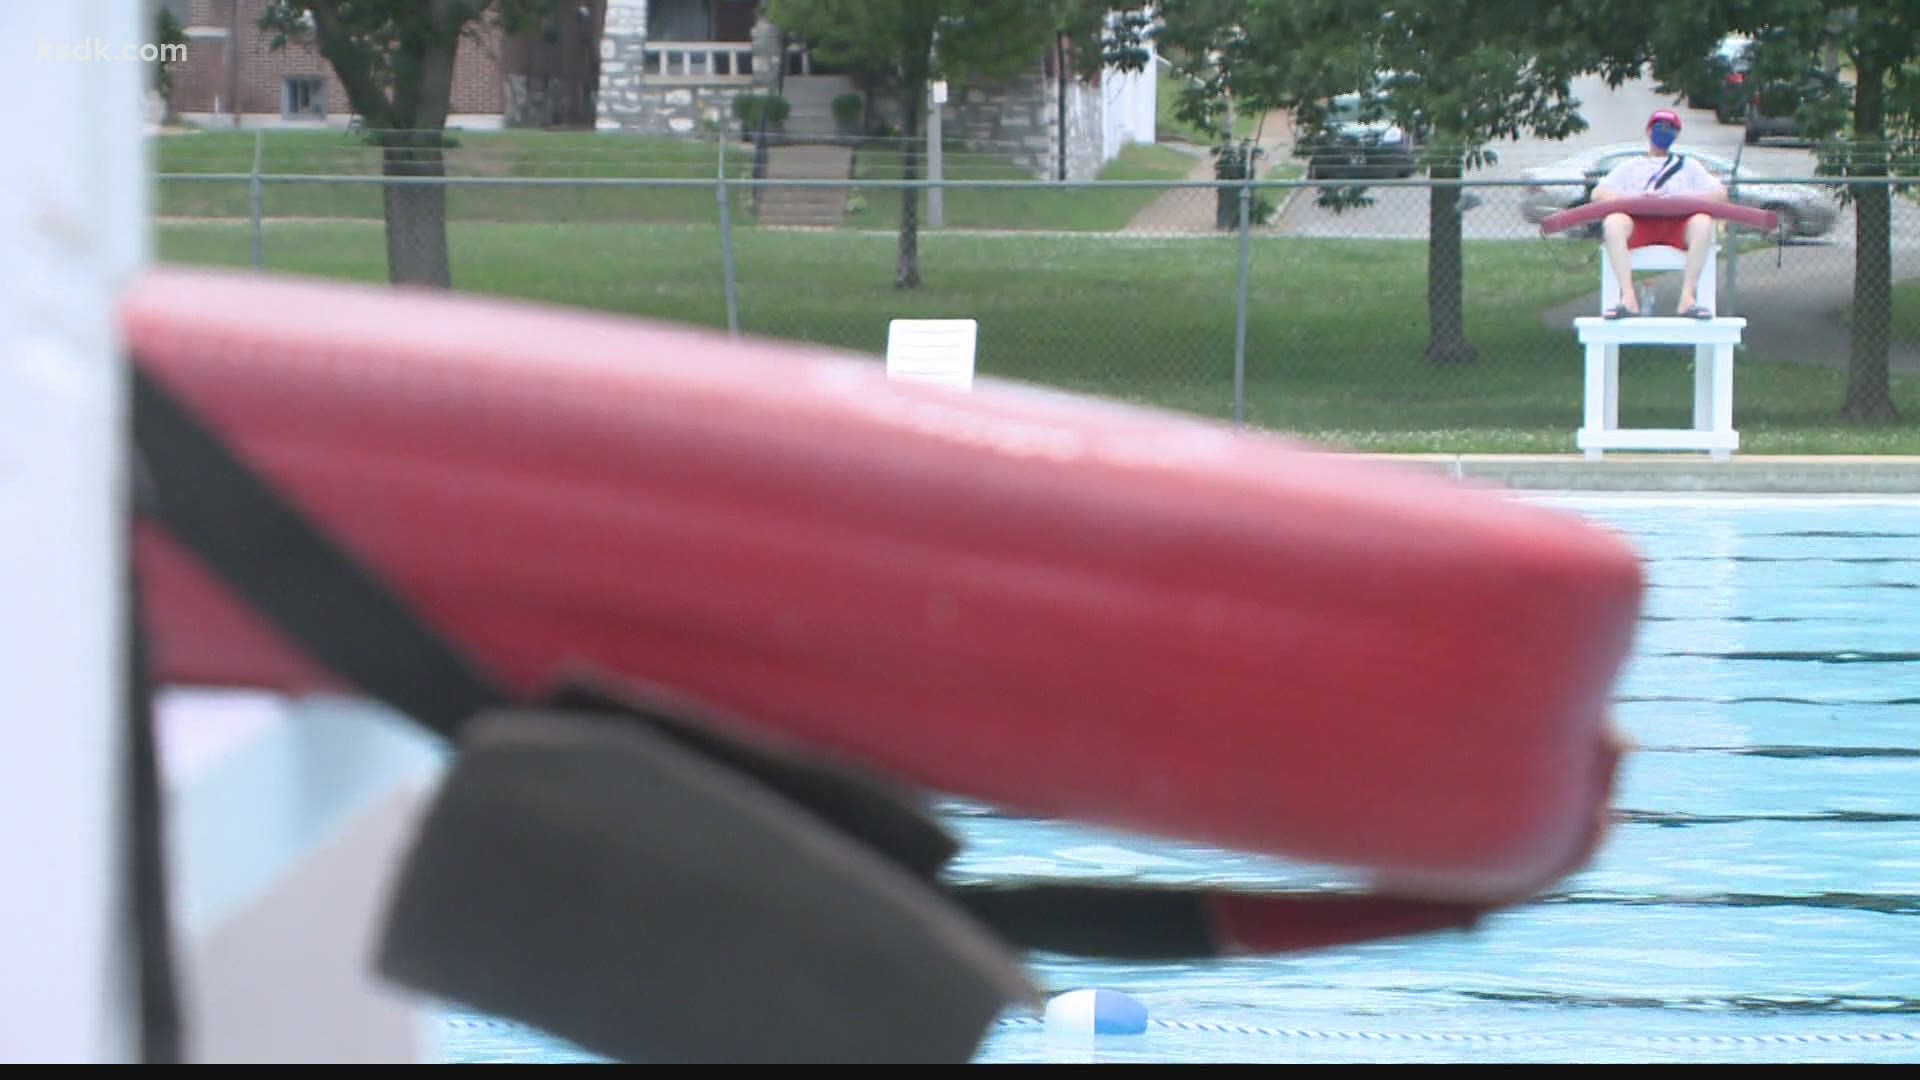 For the first time since 2019, all city pools were open Friday. Previously, only one pool was opened due to a lifeguard shortage.